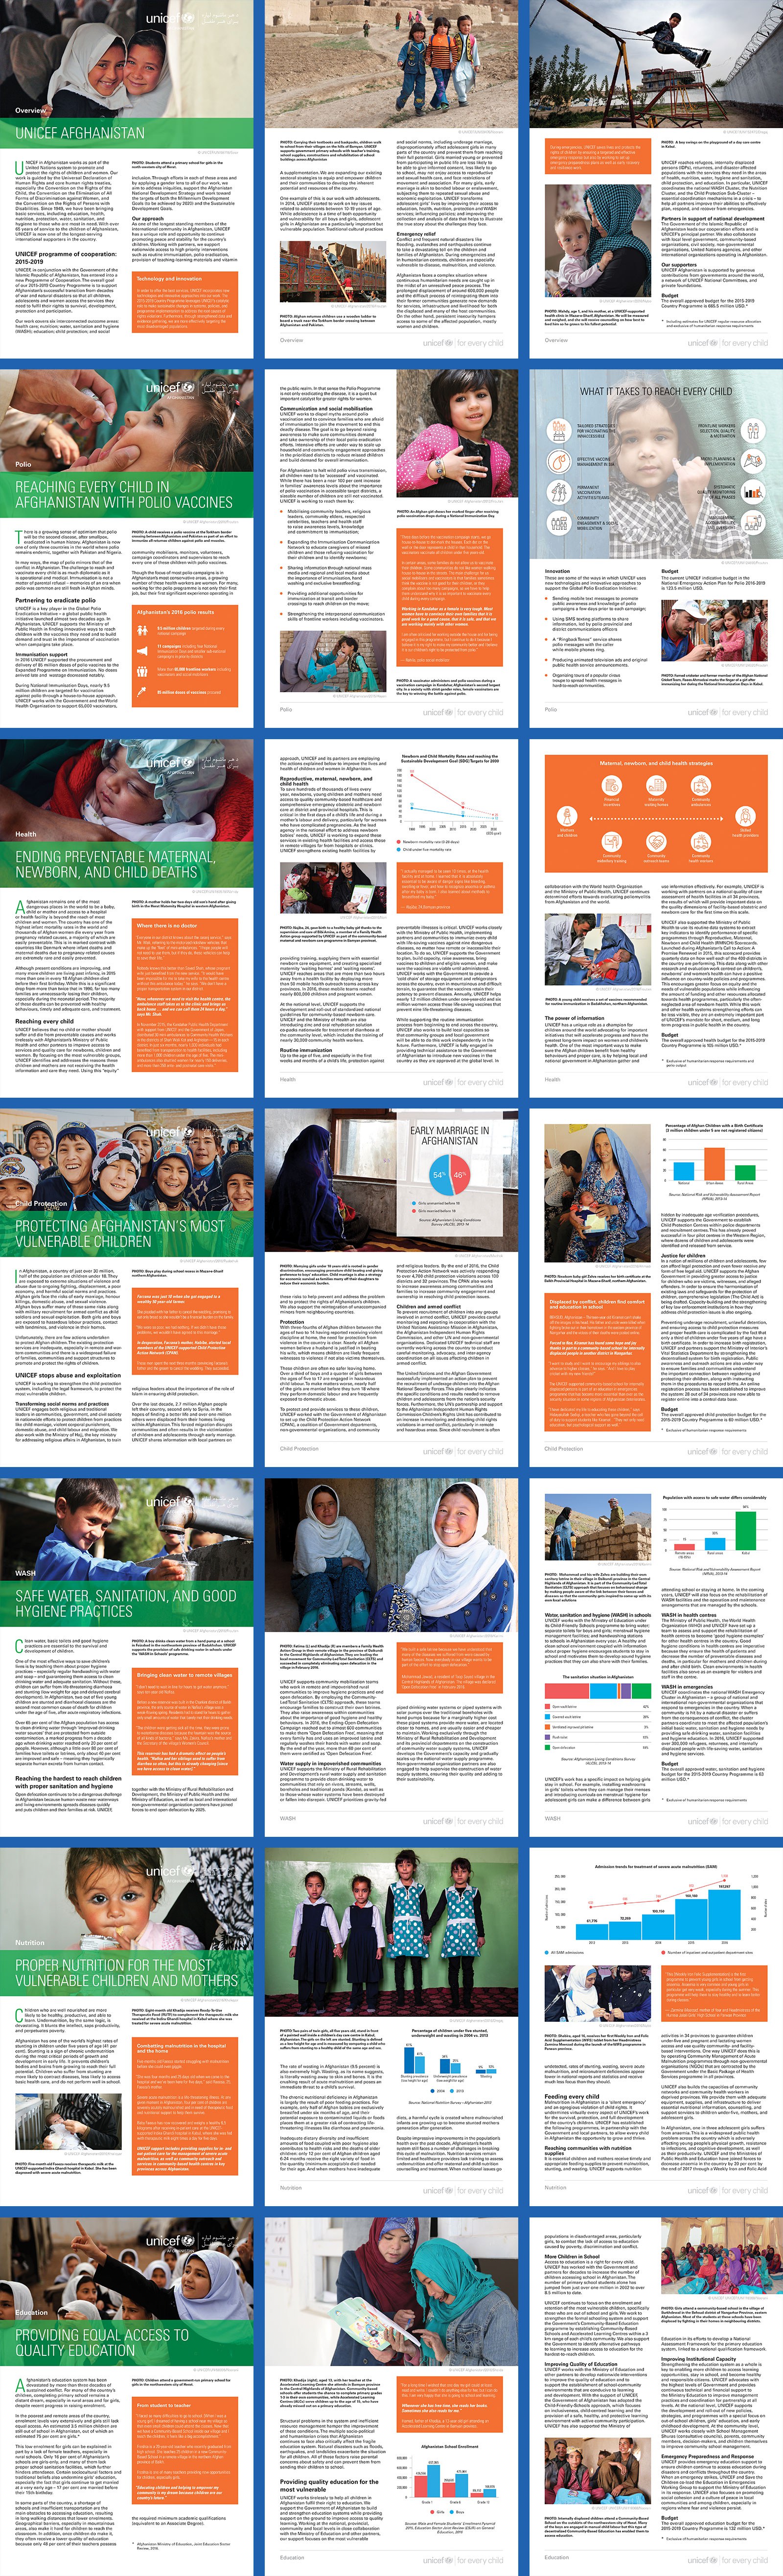 <p>Readable typography and clear charts and graphs, interwoven with journalistic photography (provided by UNICEF) make these data-rich briefs comfortable to read and easy to comprehend.</p>